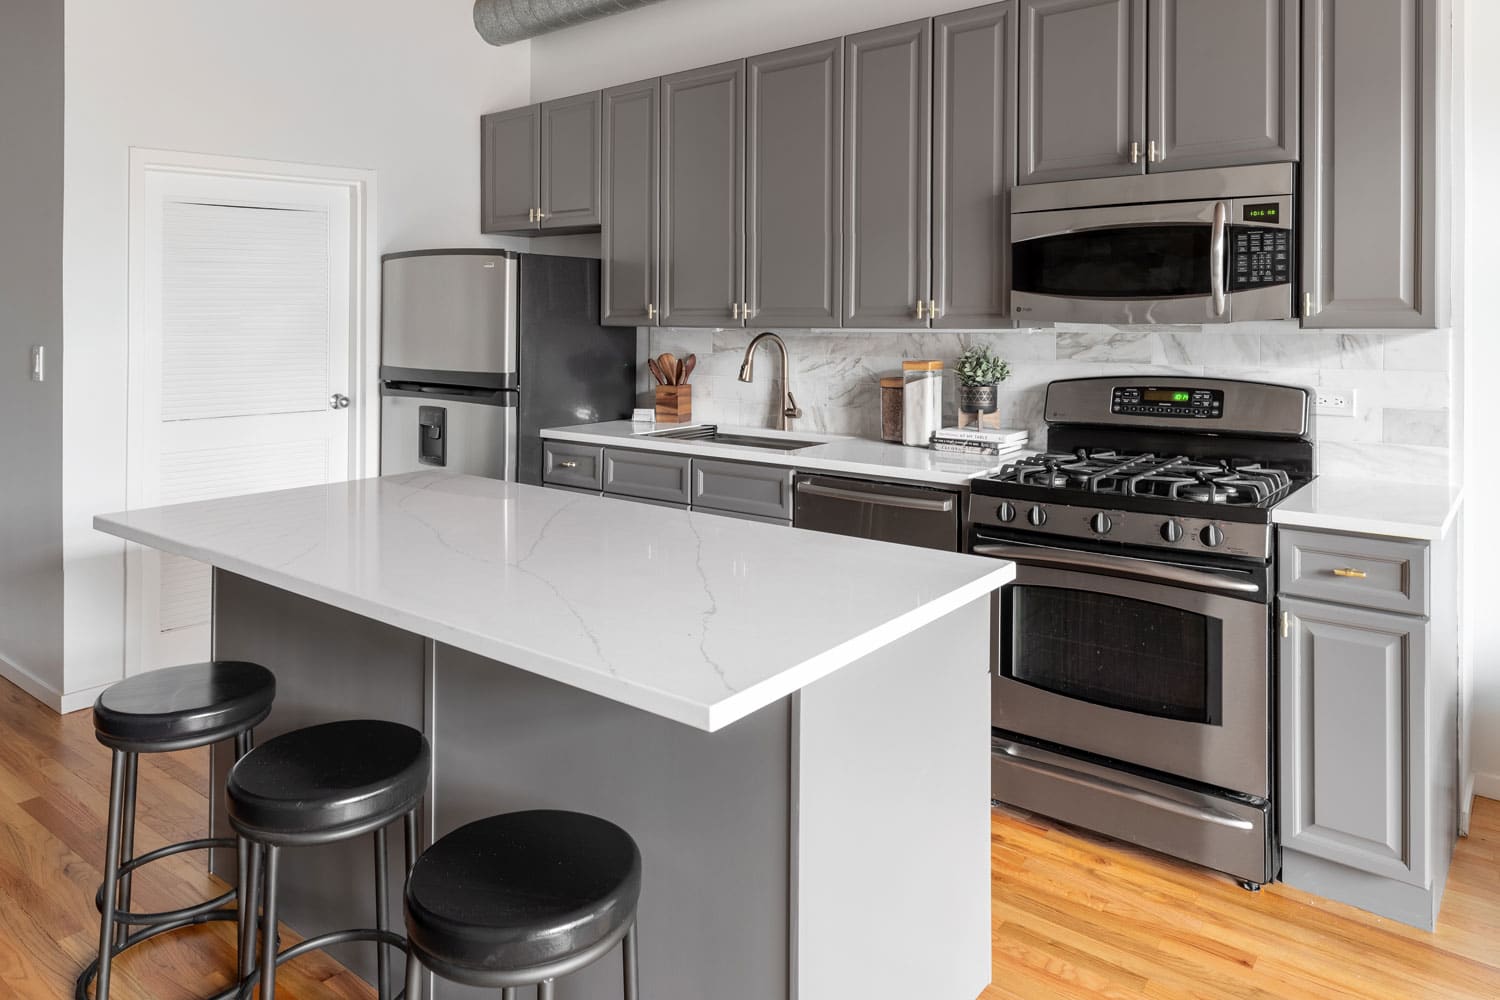 Interior of a white and gray themed kitchen with a GE oven and other GE appliances